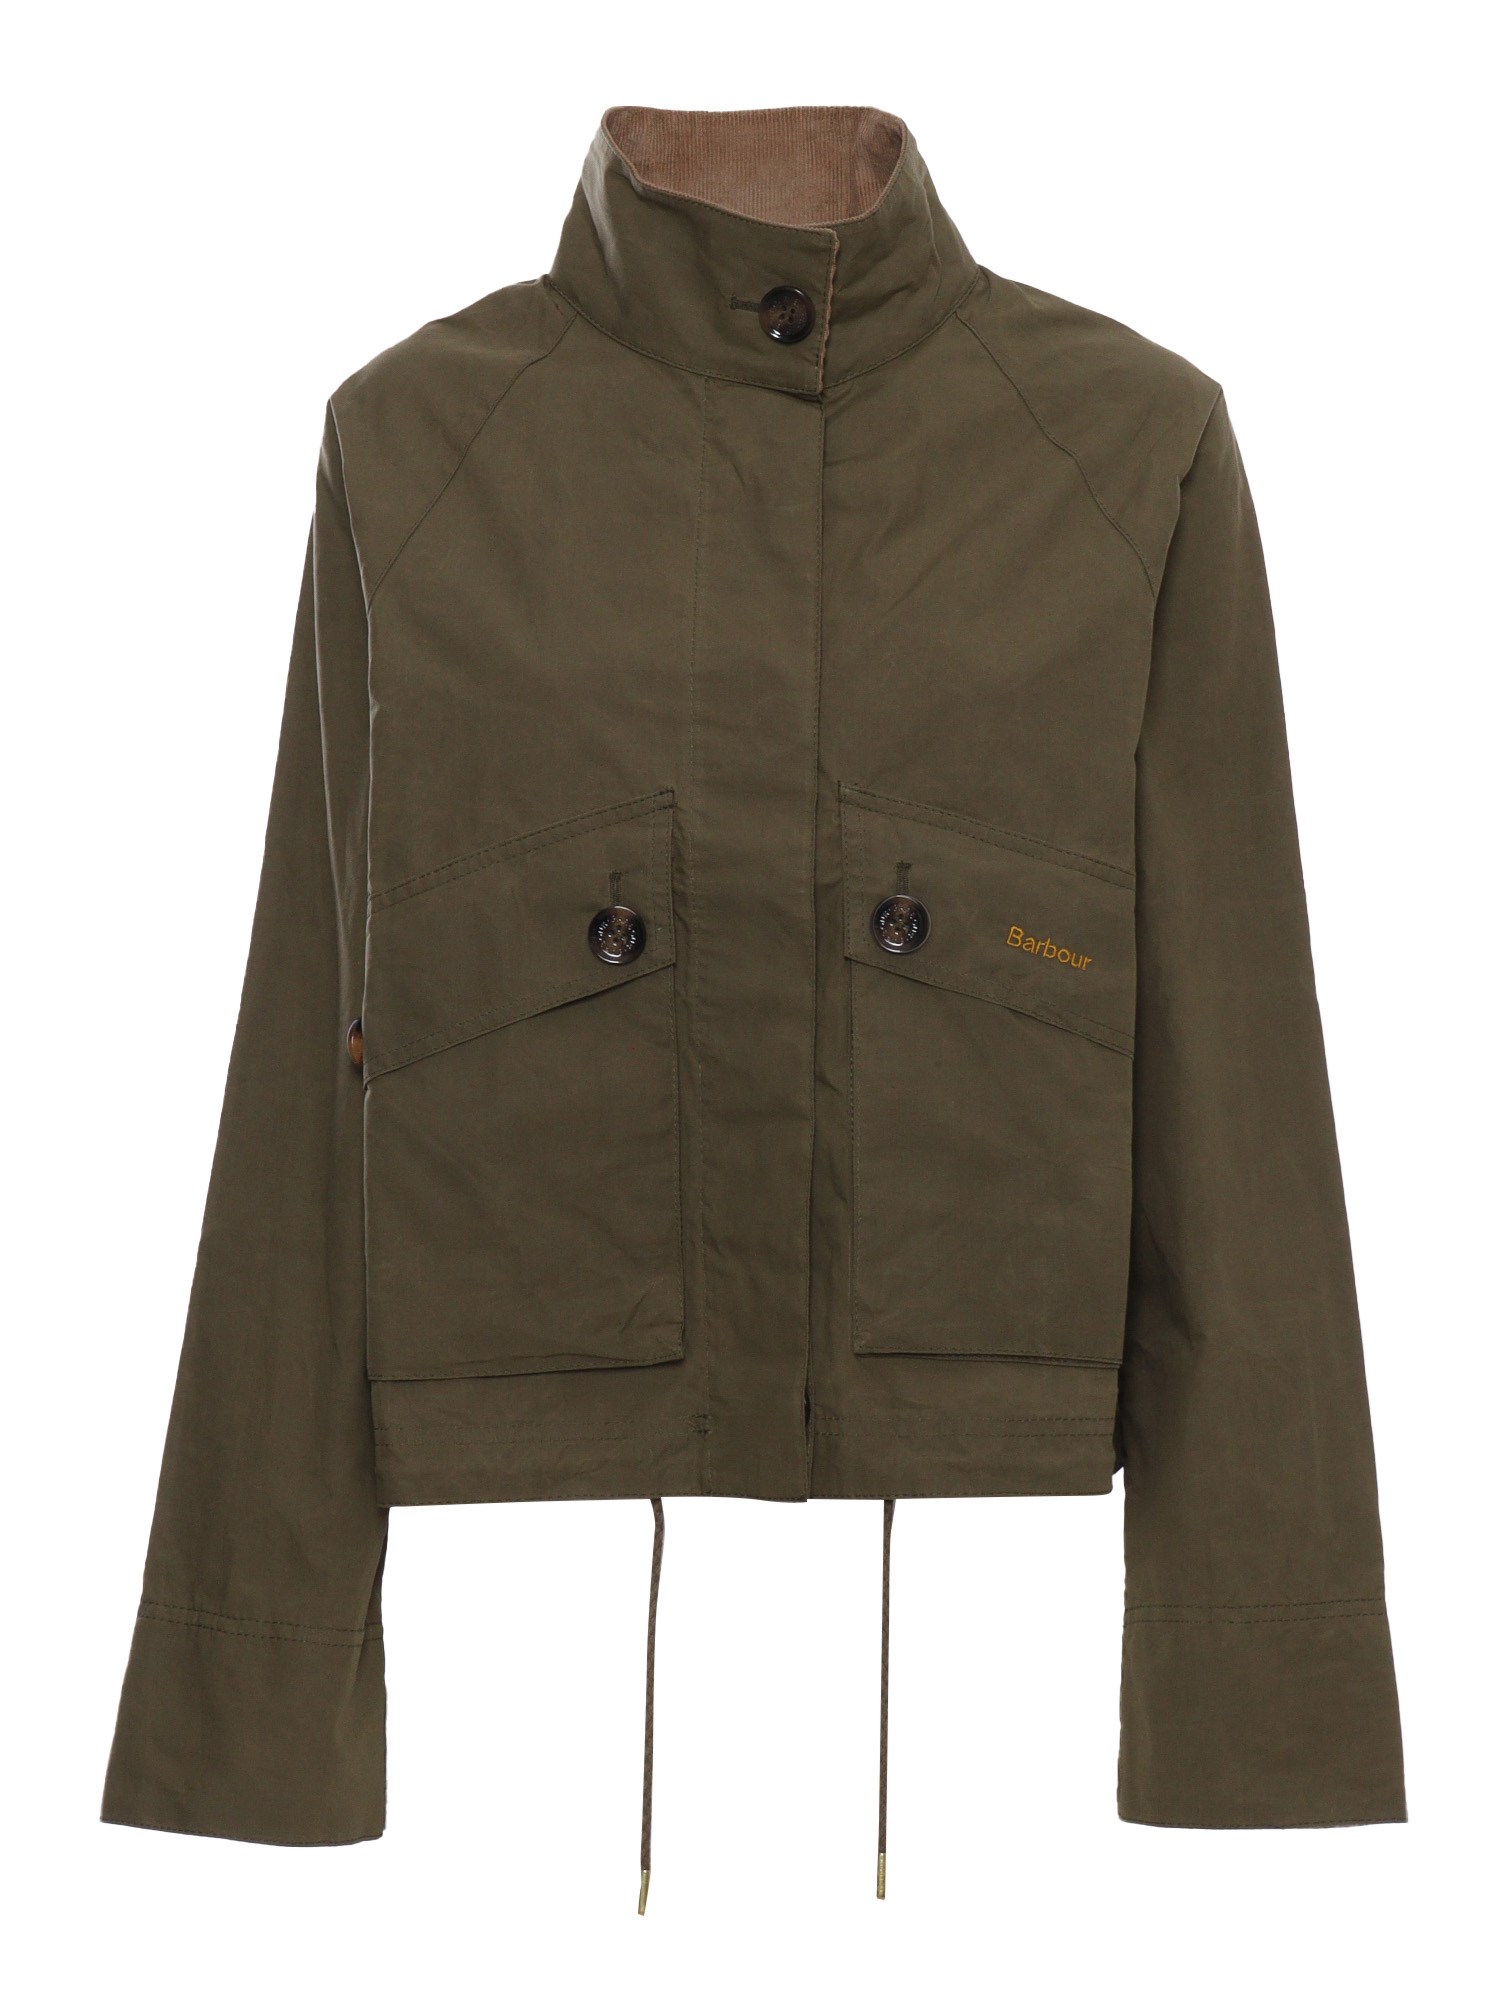 Shop Barbour Military Green Jacket